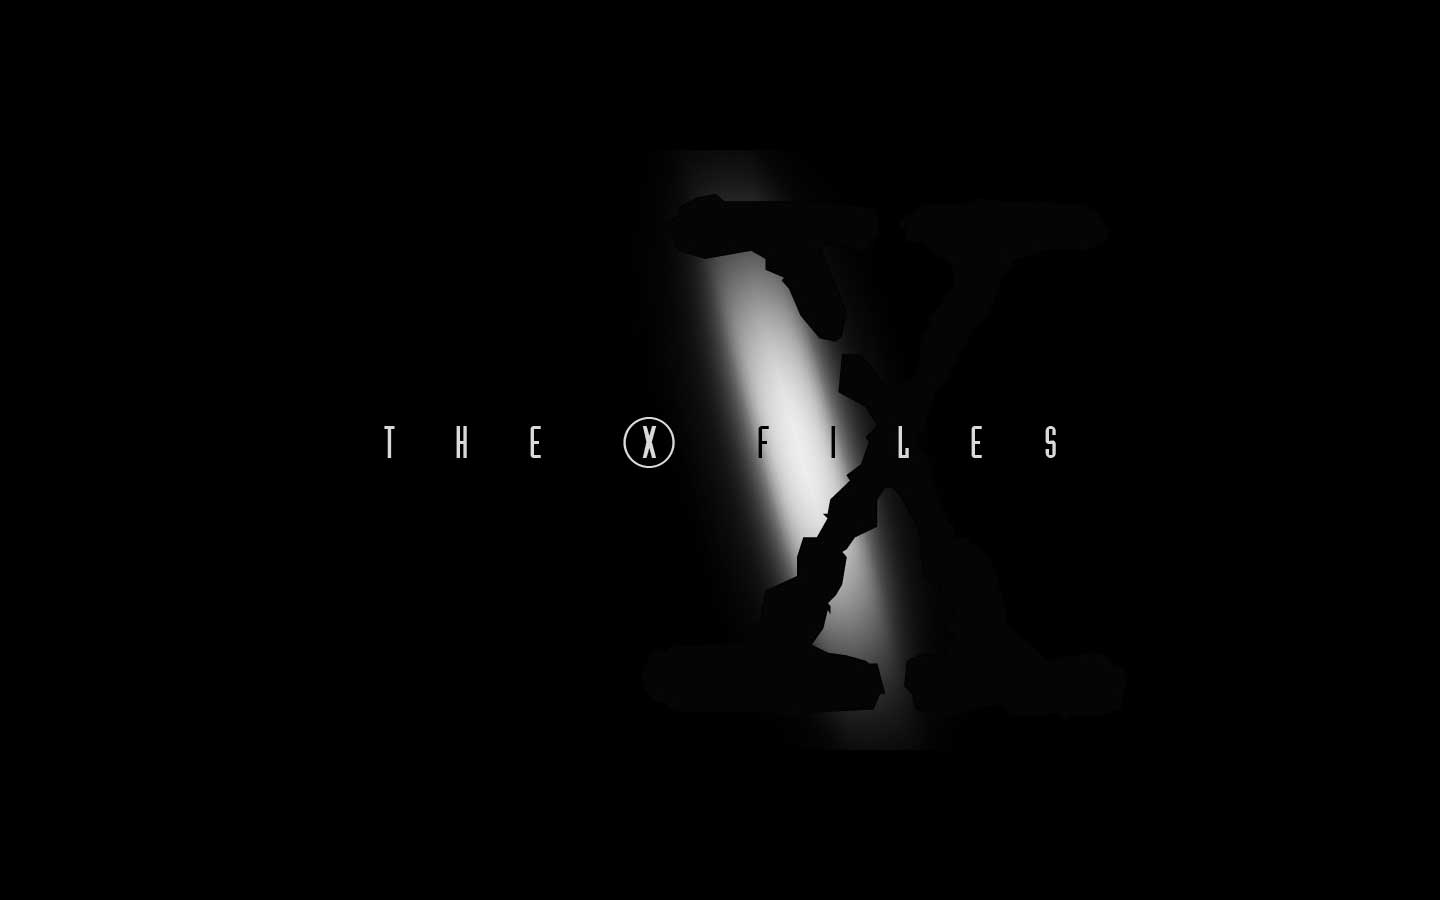 The X Files Wallpapers - Wallpaper Cave